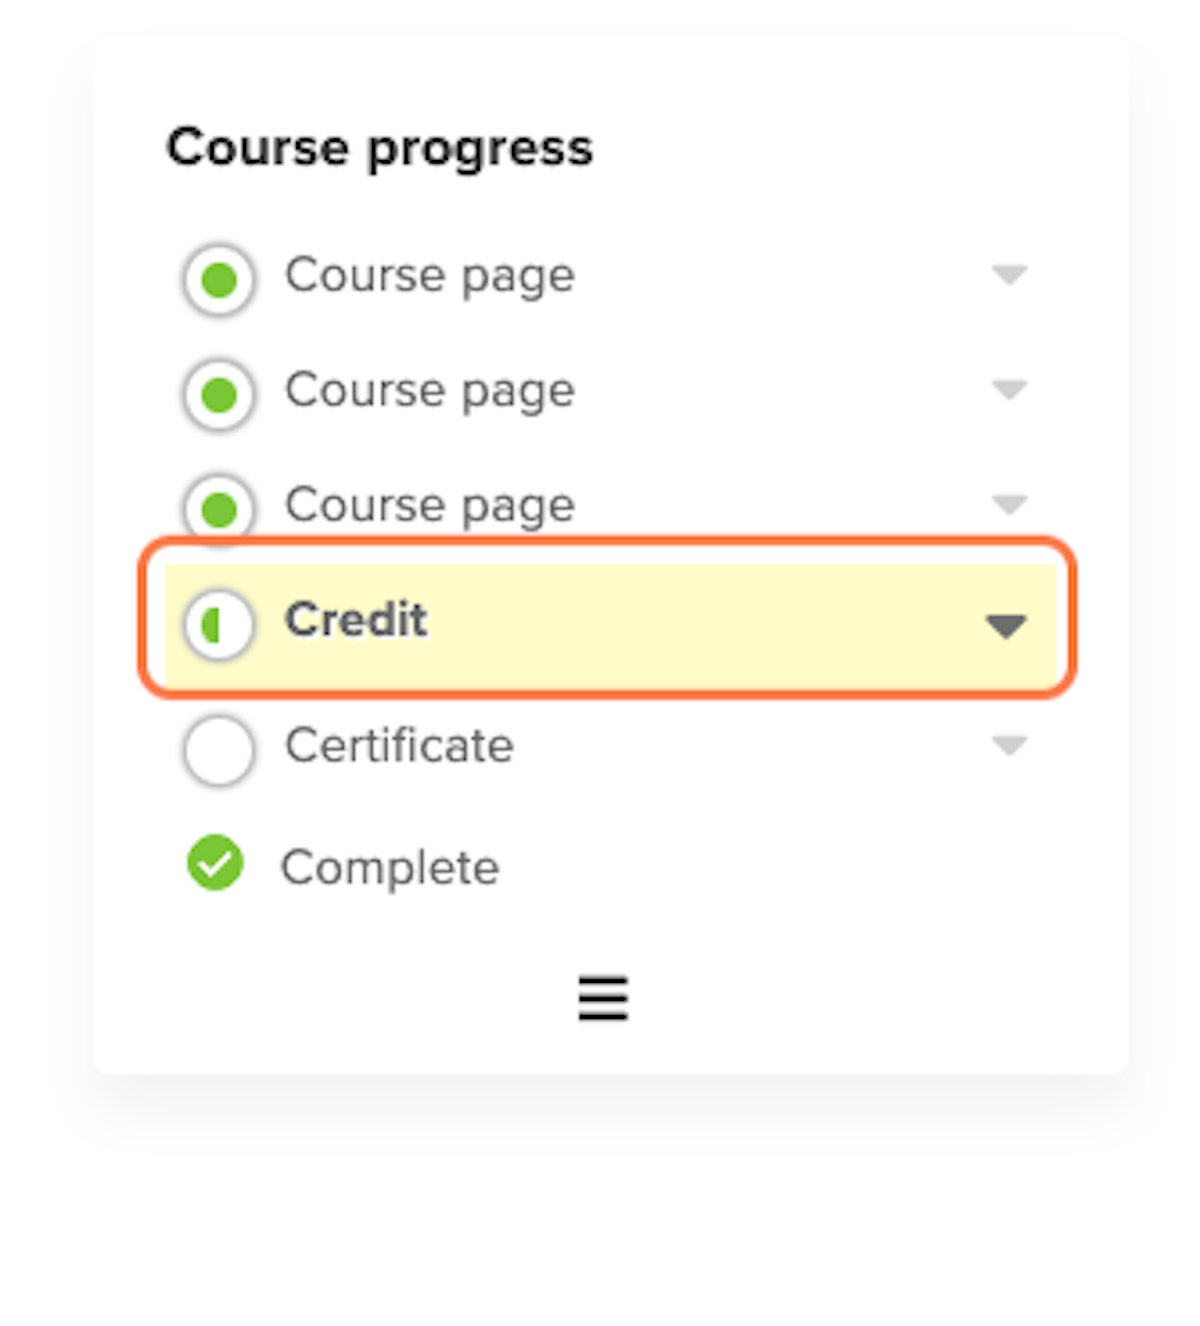 After completing all required content for the event or activity, navigate to the "Credit" object.